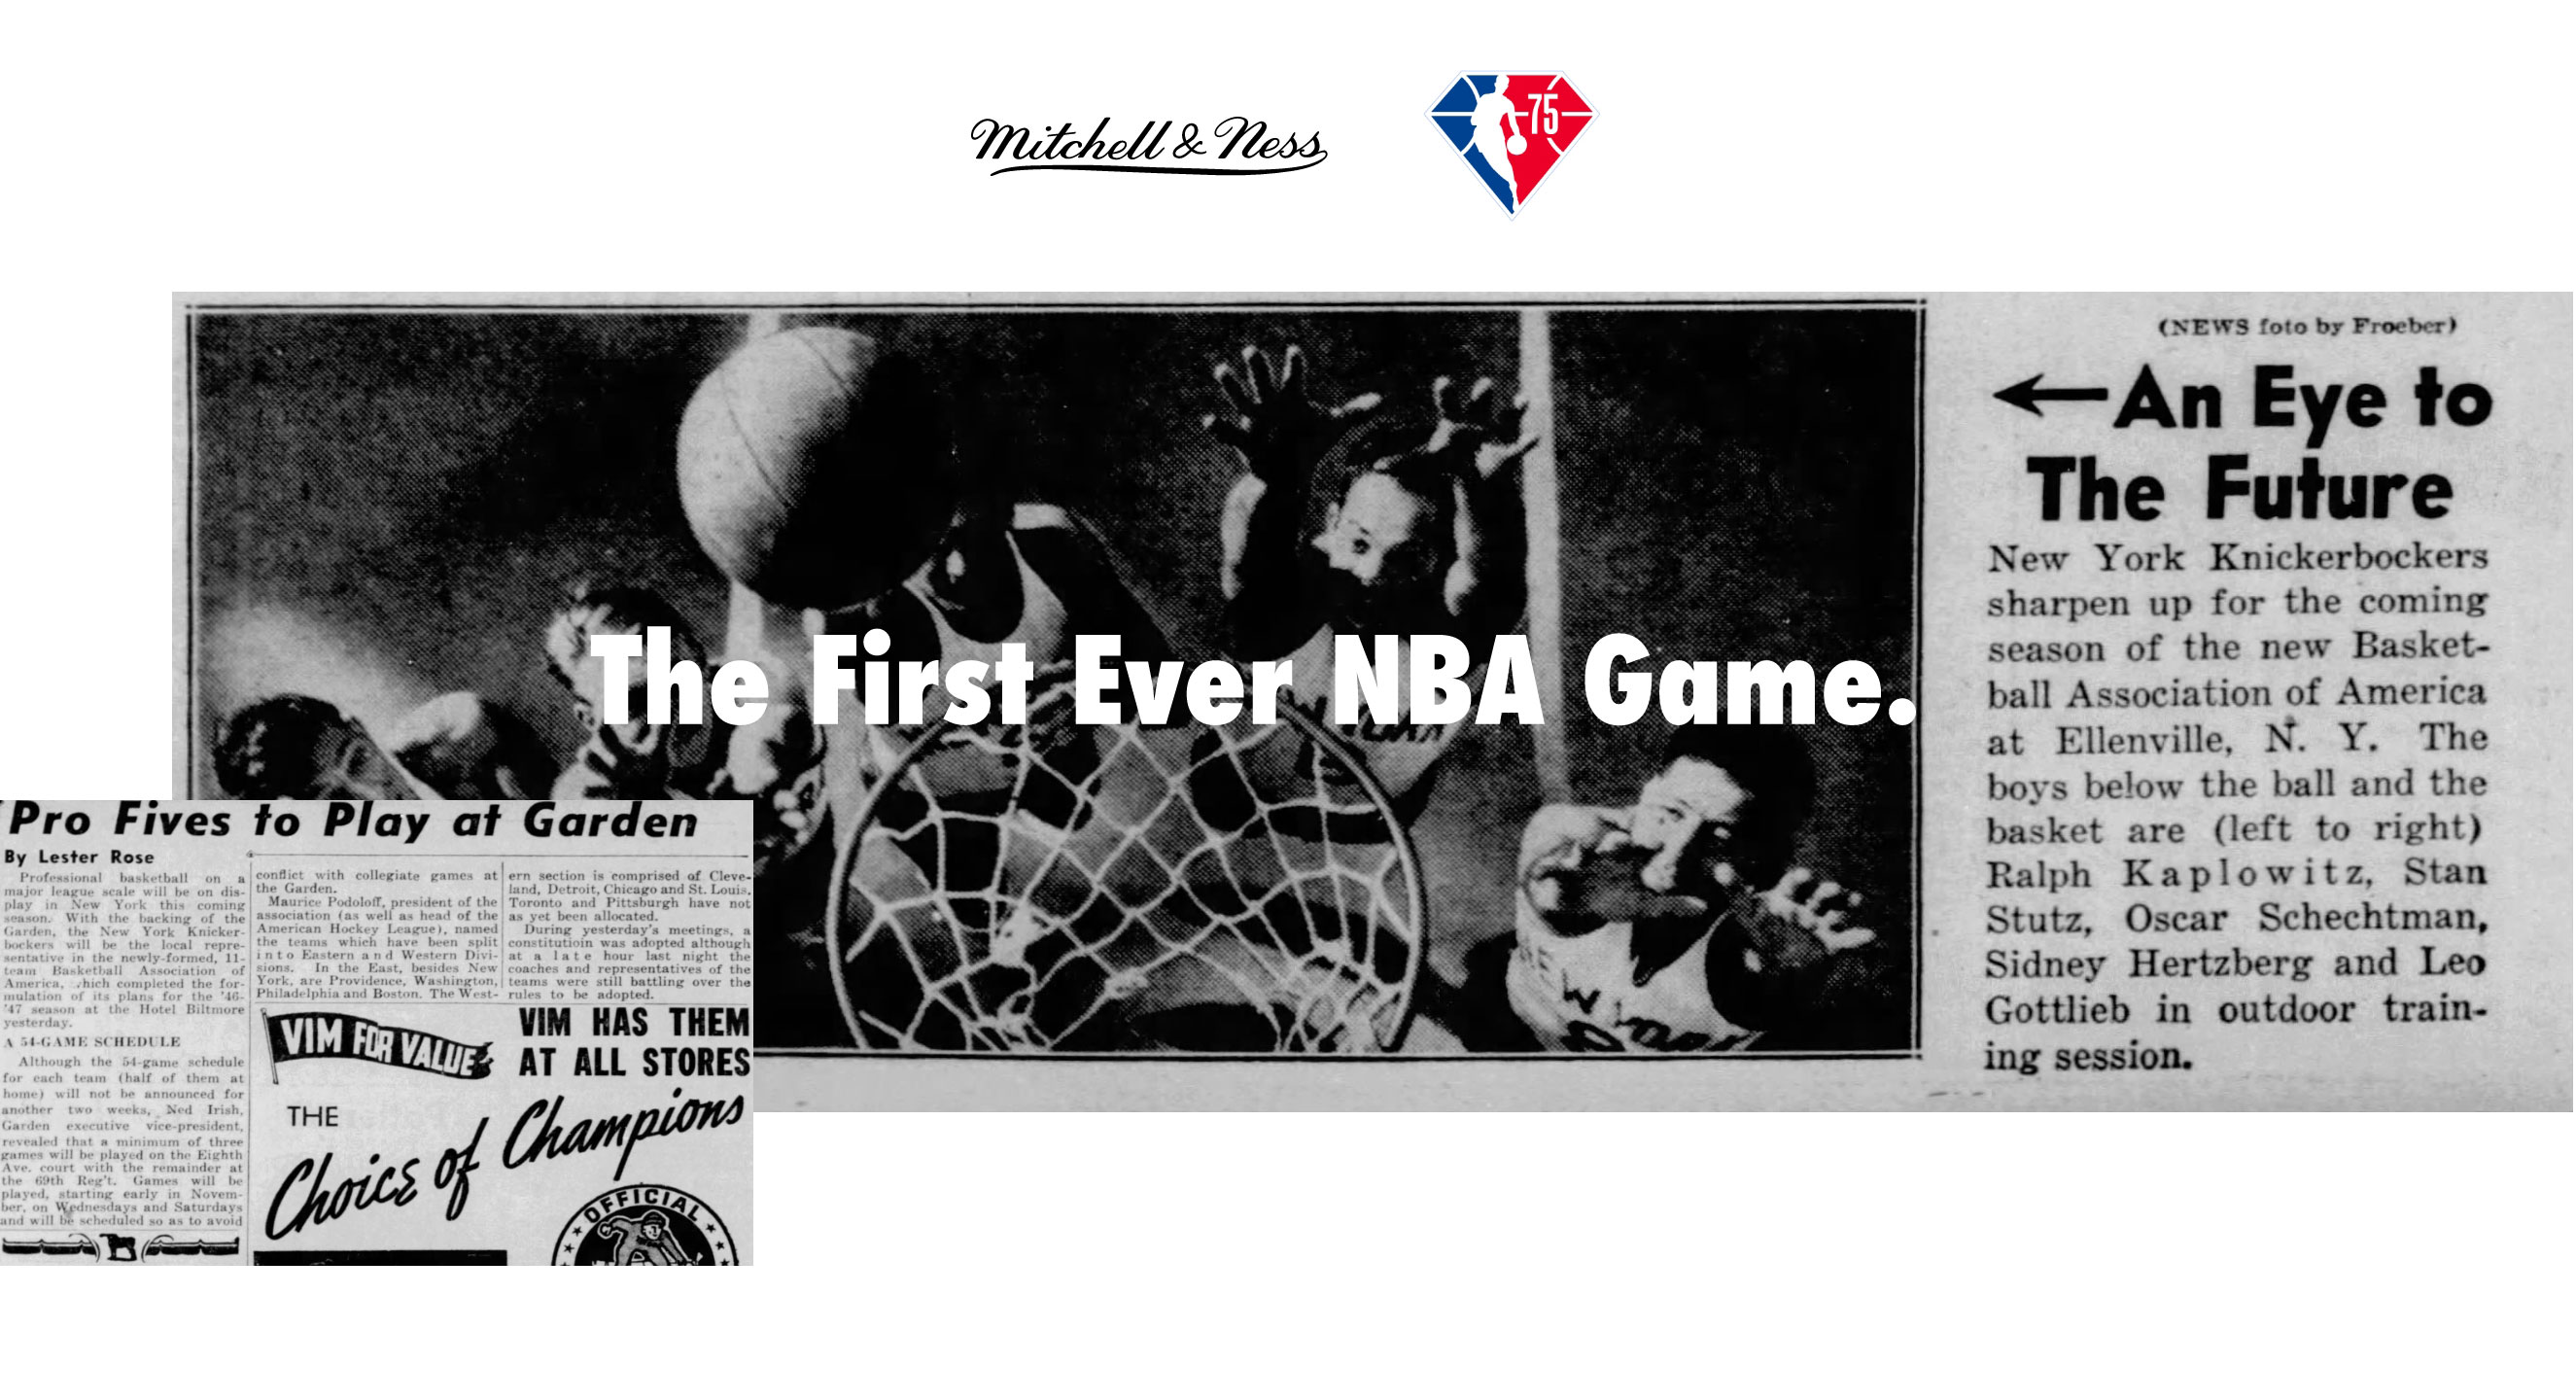 The first NBA game